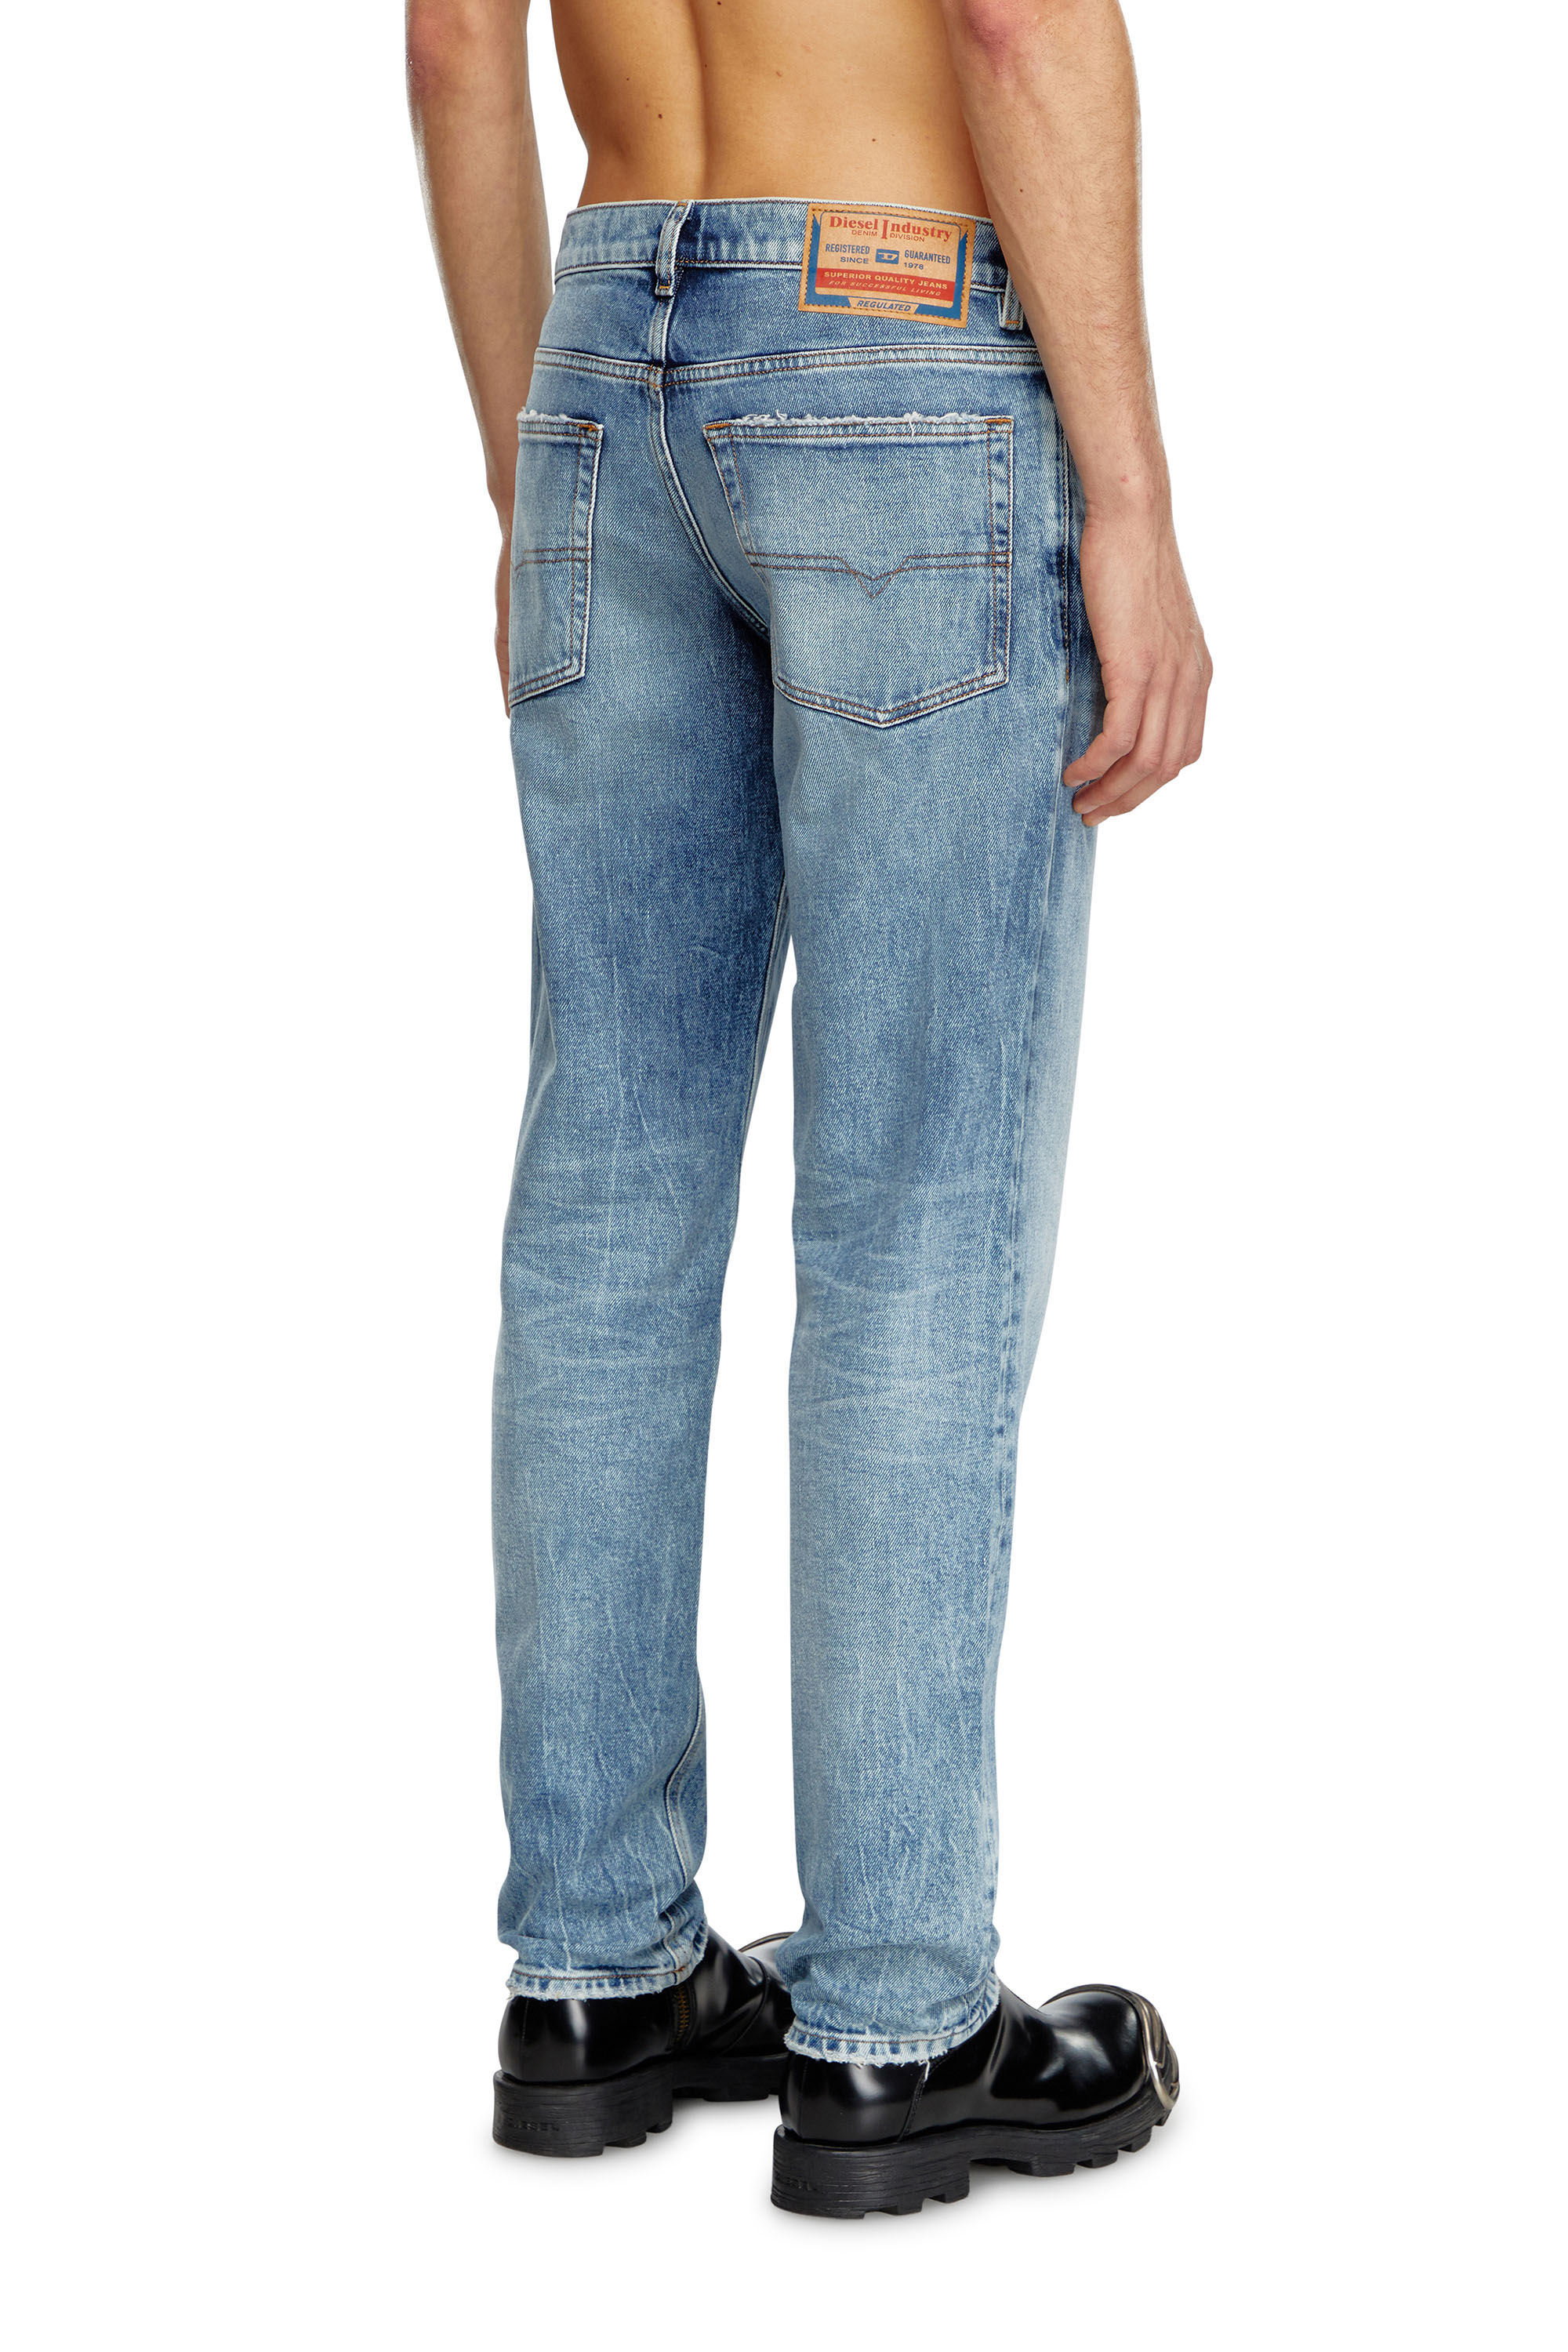 Diesel - Tapered Jeans 2023 D-Finitive 09J54, Hombre Tapered Jeans - 2023 D-Finitive in Azul marino - Image 4